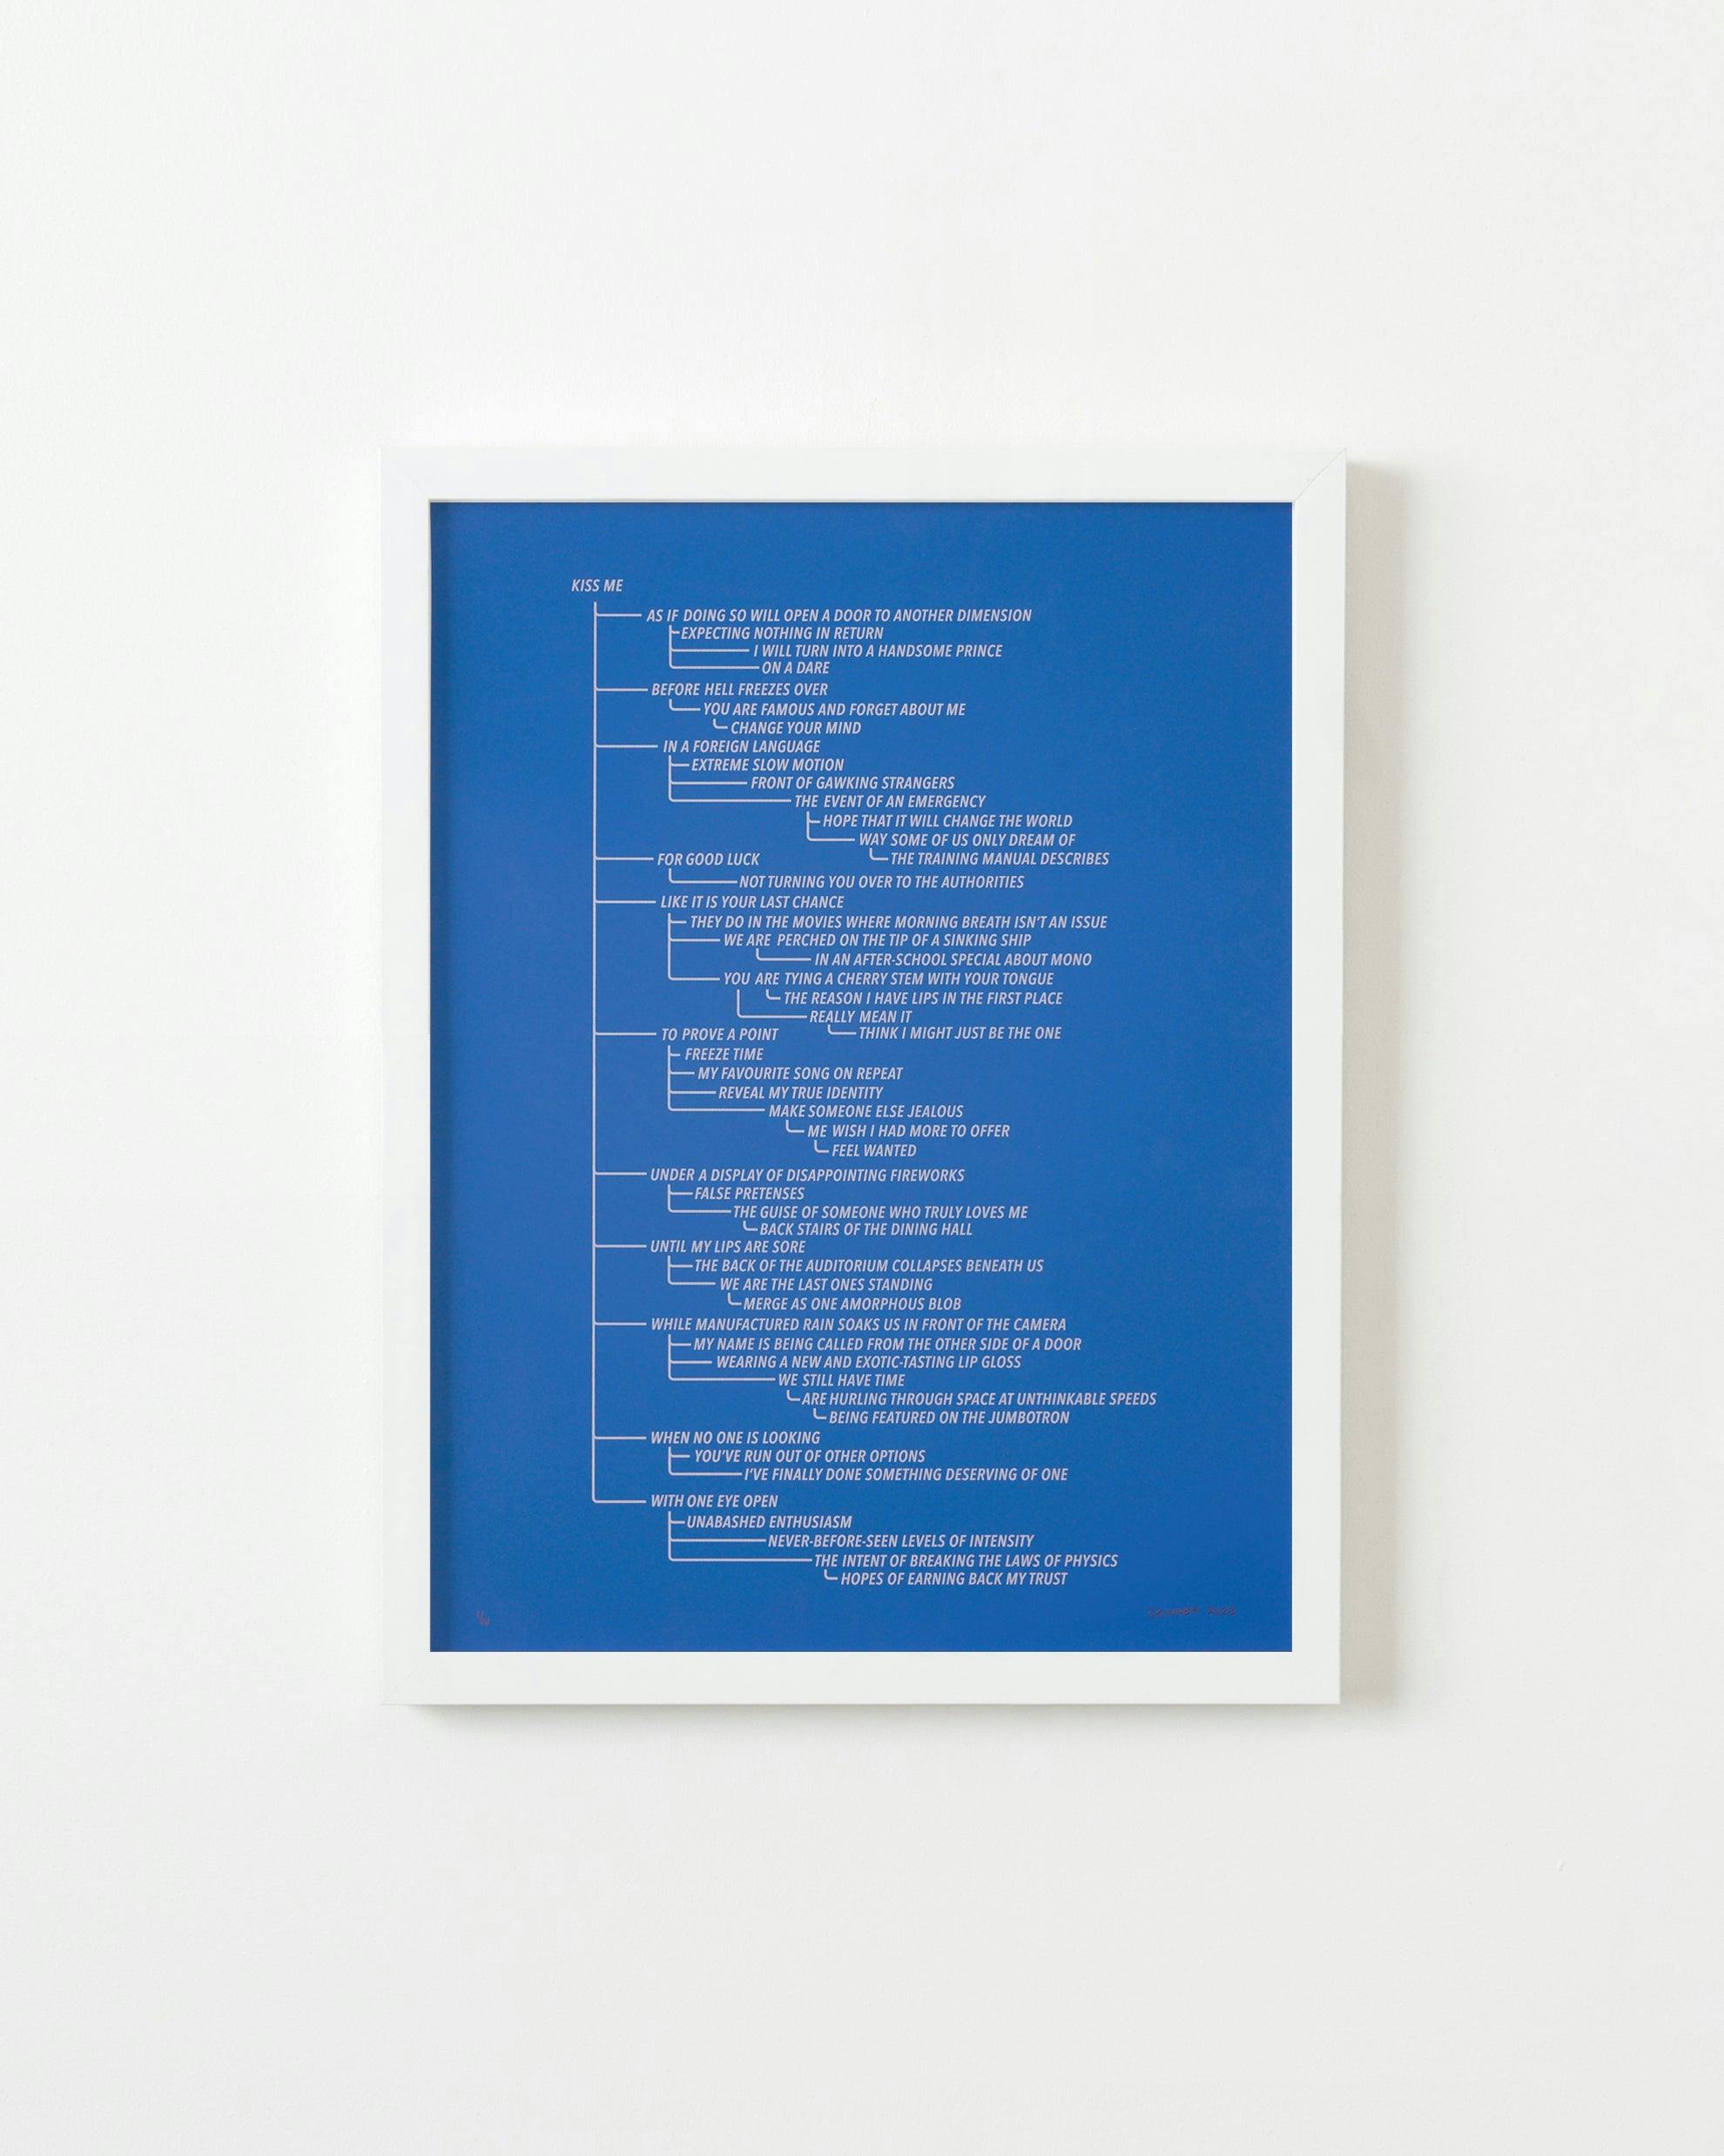 Print by Ben Skinner titled "Blue 4. From the Kiss Me Flow Chart (Blue Series)".